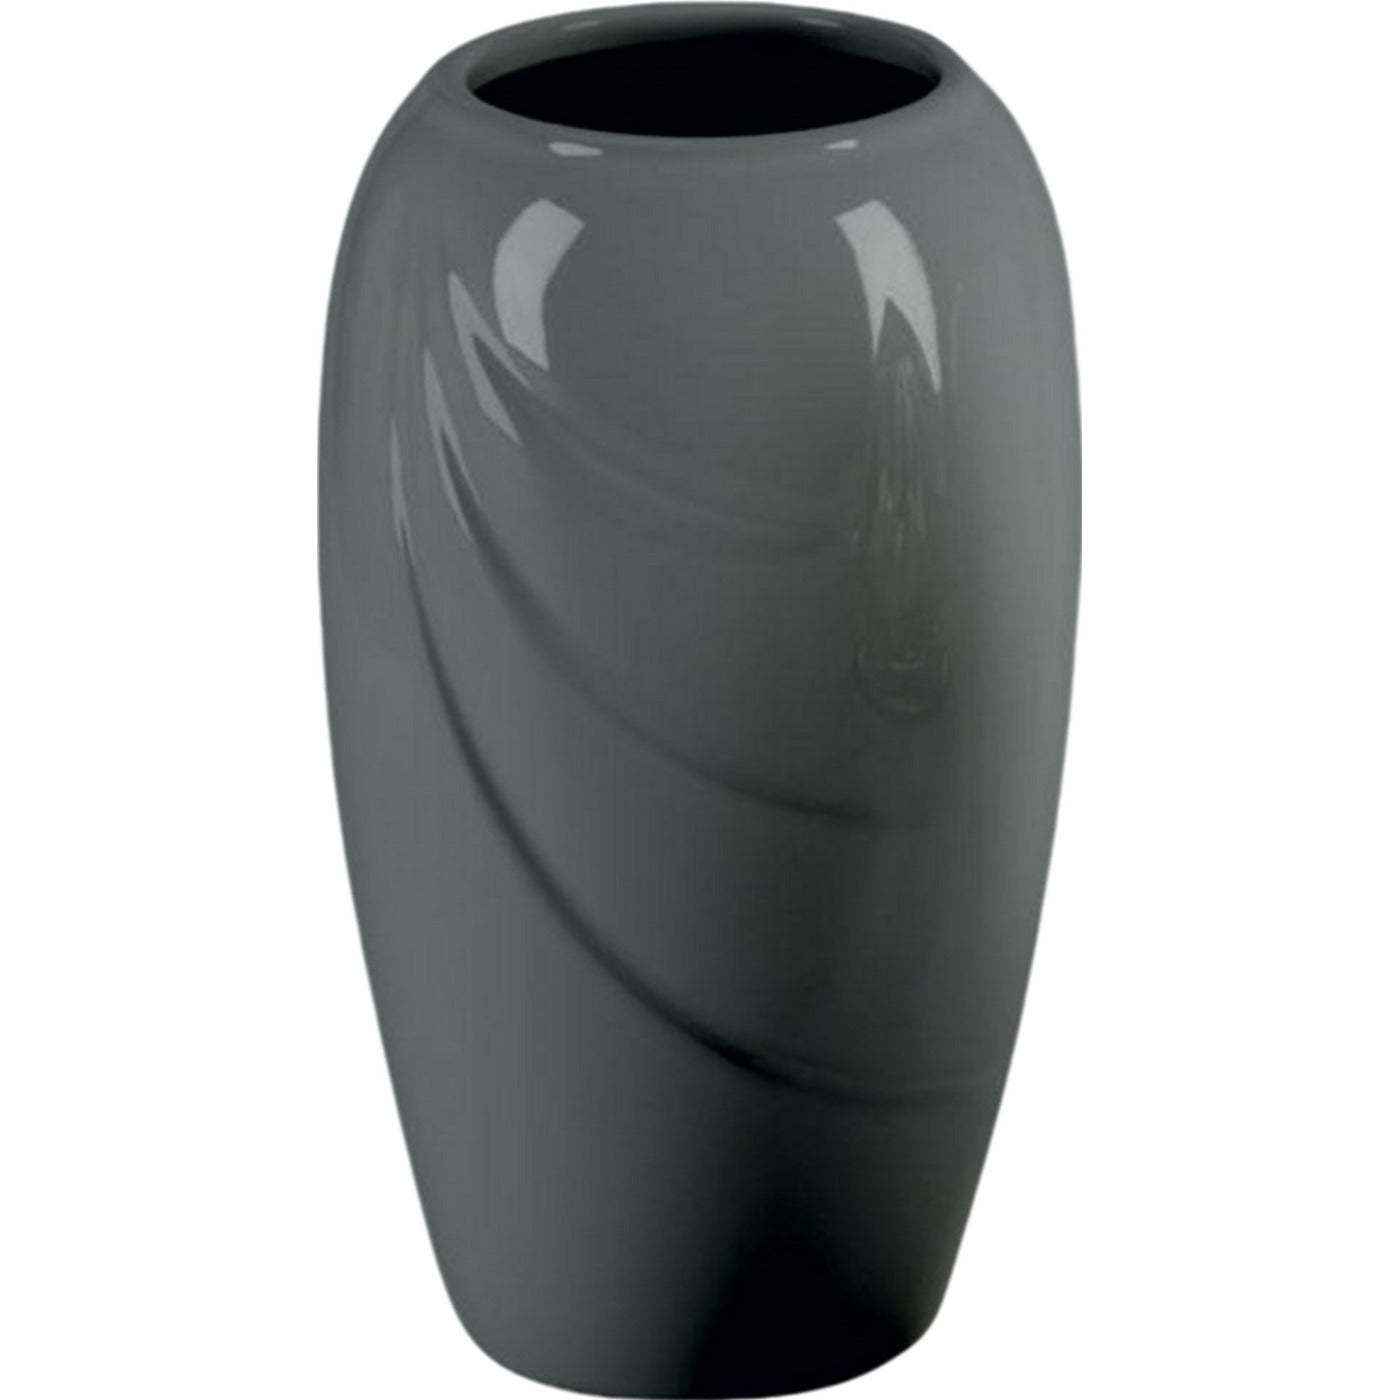 Grave vase Ecotre gray 21x13cm - 8.3x5.1in In gray porcelain, wall attached ECO150P/G